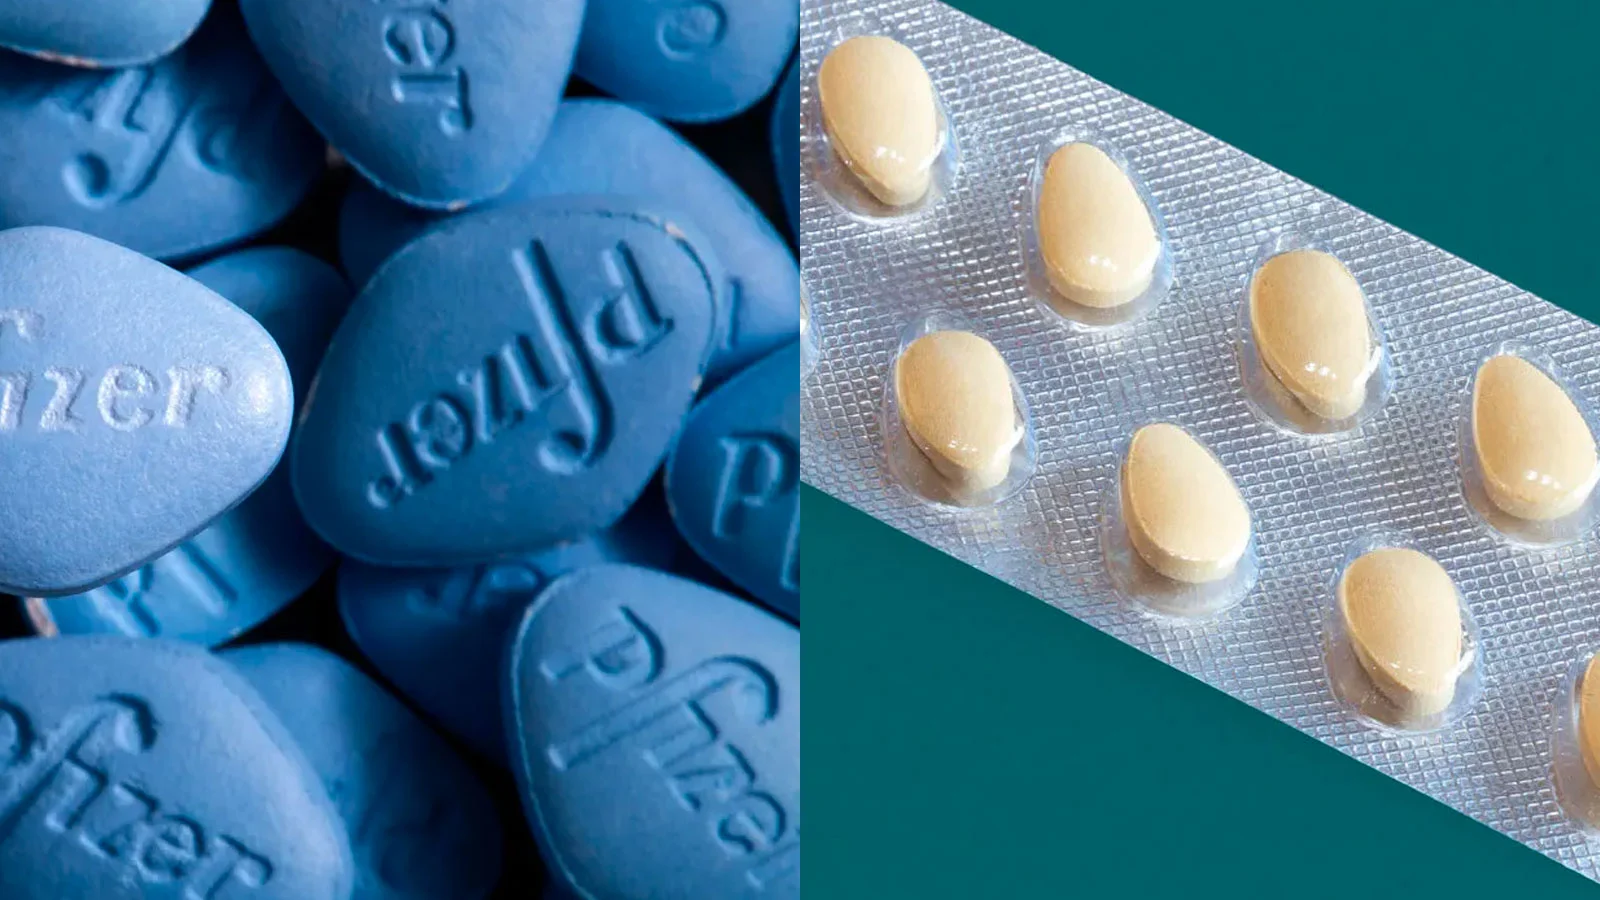 Cialis vs Viagra: Which Is Best For Your B*ner? - DMARGE